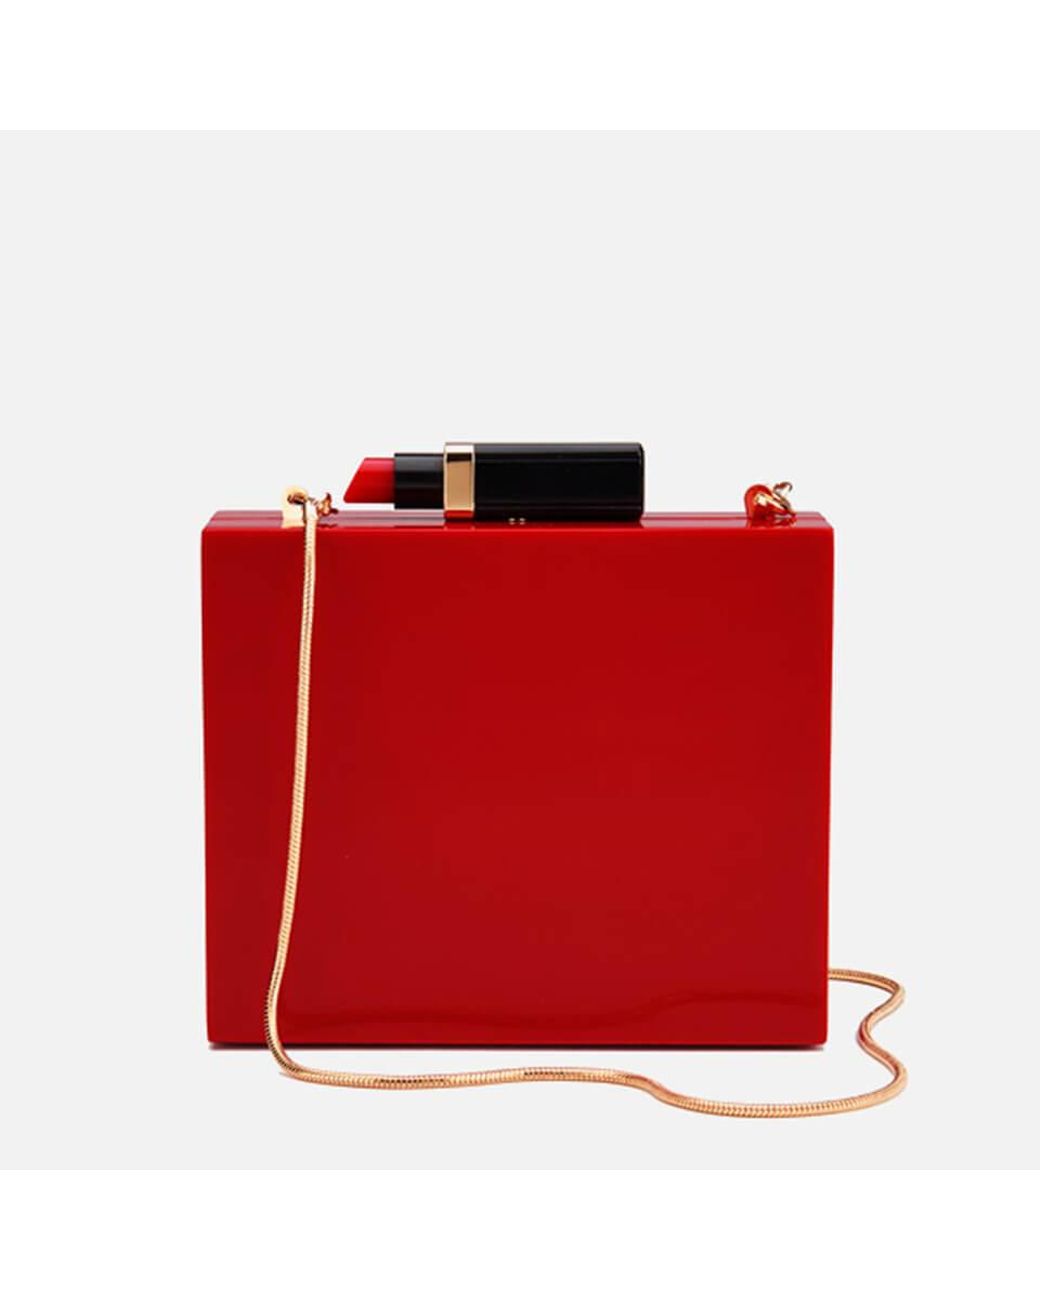 Lulu Guinness Chloe Perspex Clutch Bag With Lipstick in Red